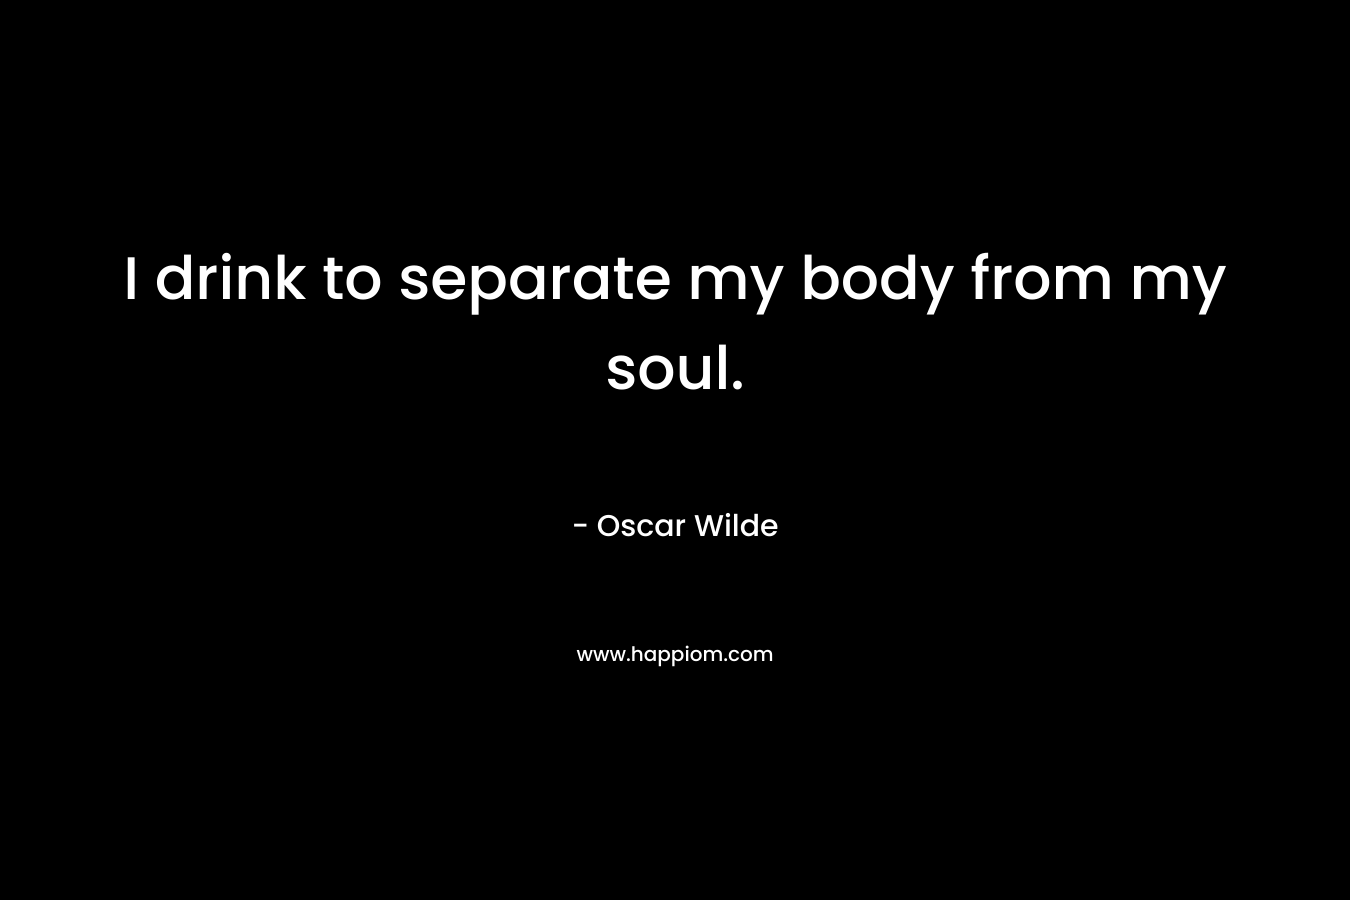 I drink to separate my body from my soul.